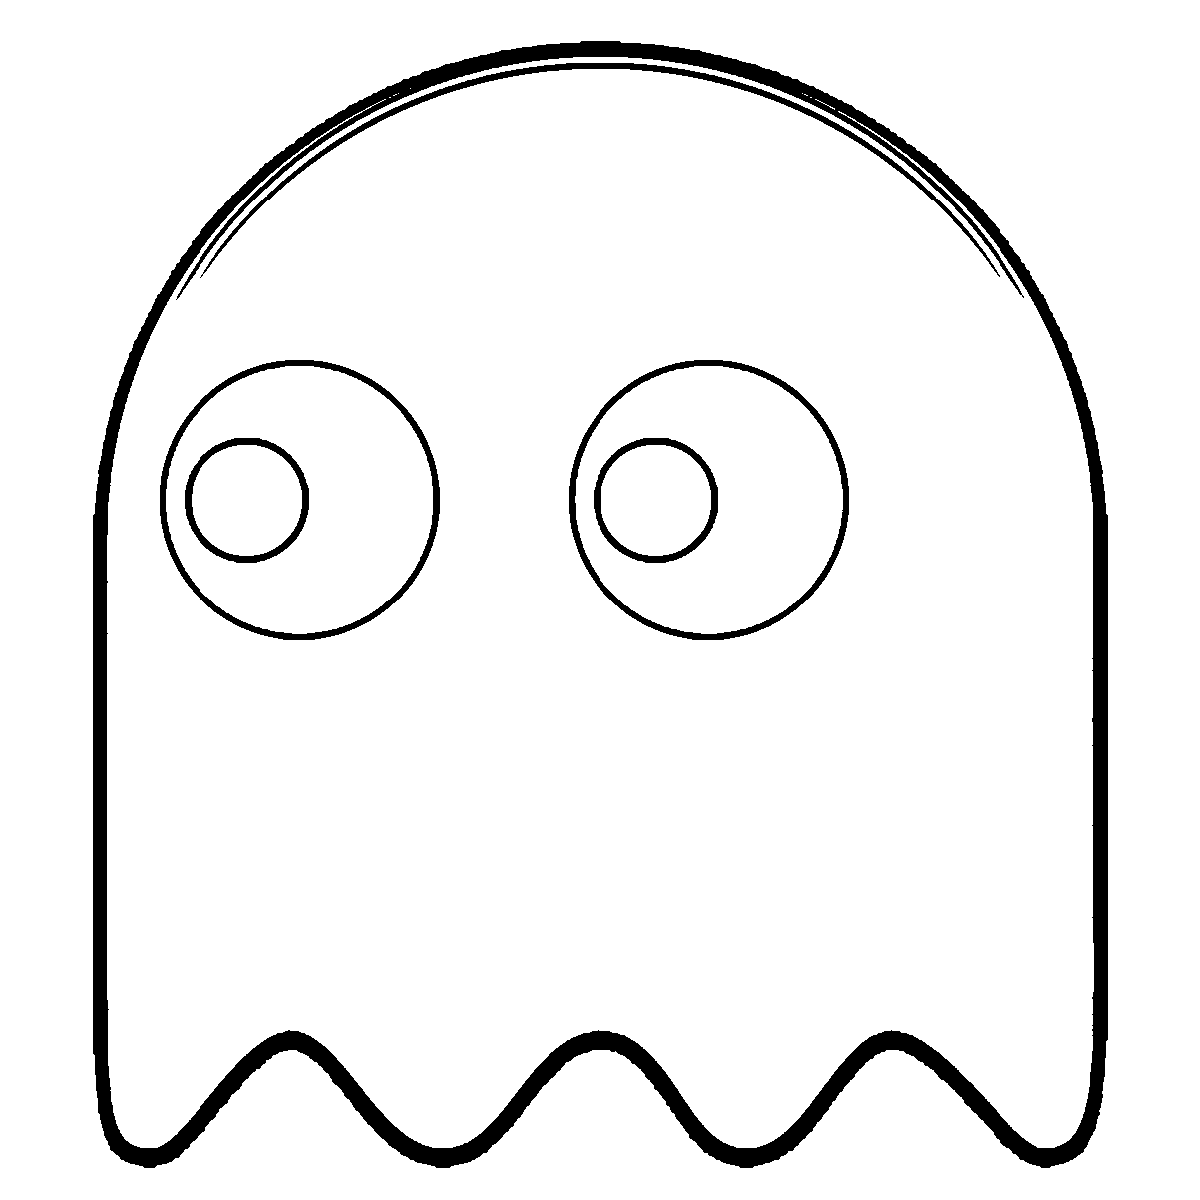 Pacman coloring pages ghostly educative printable coloring pages pacman templates printable free